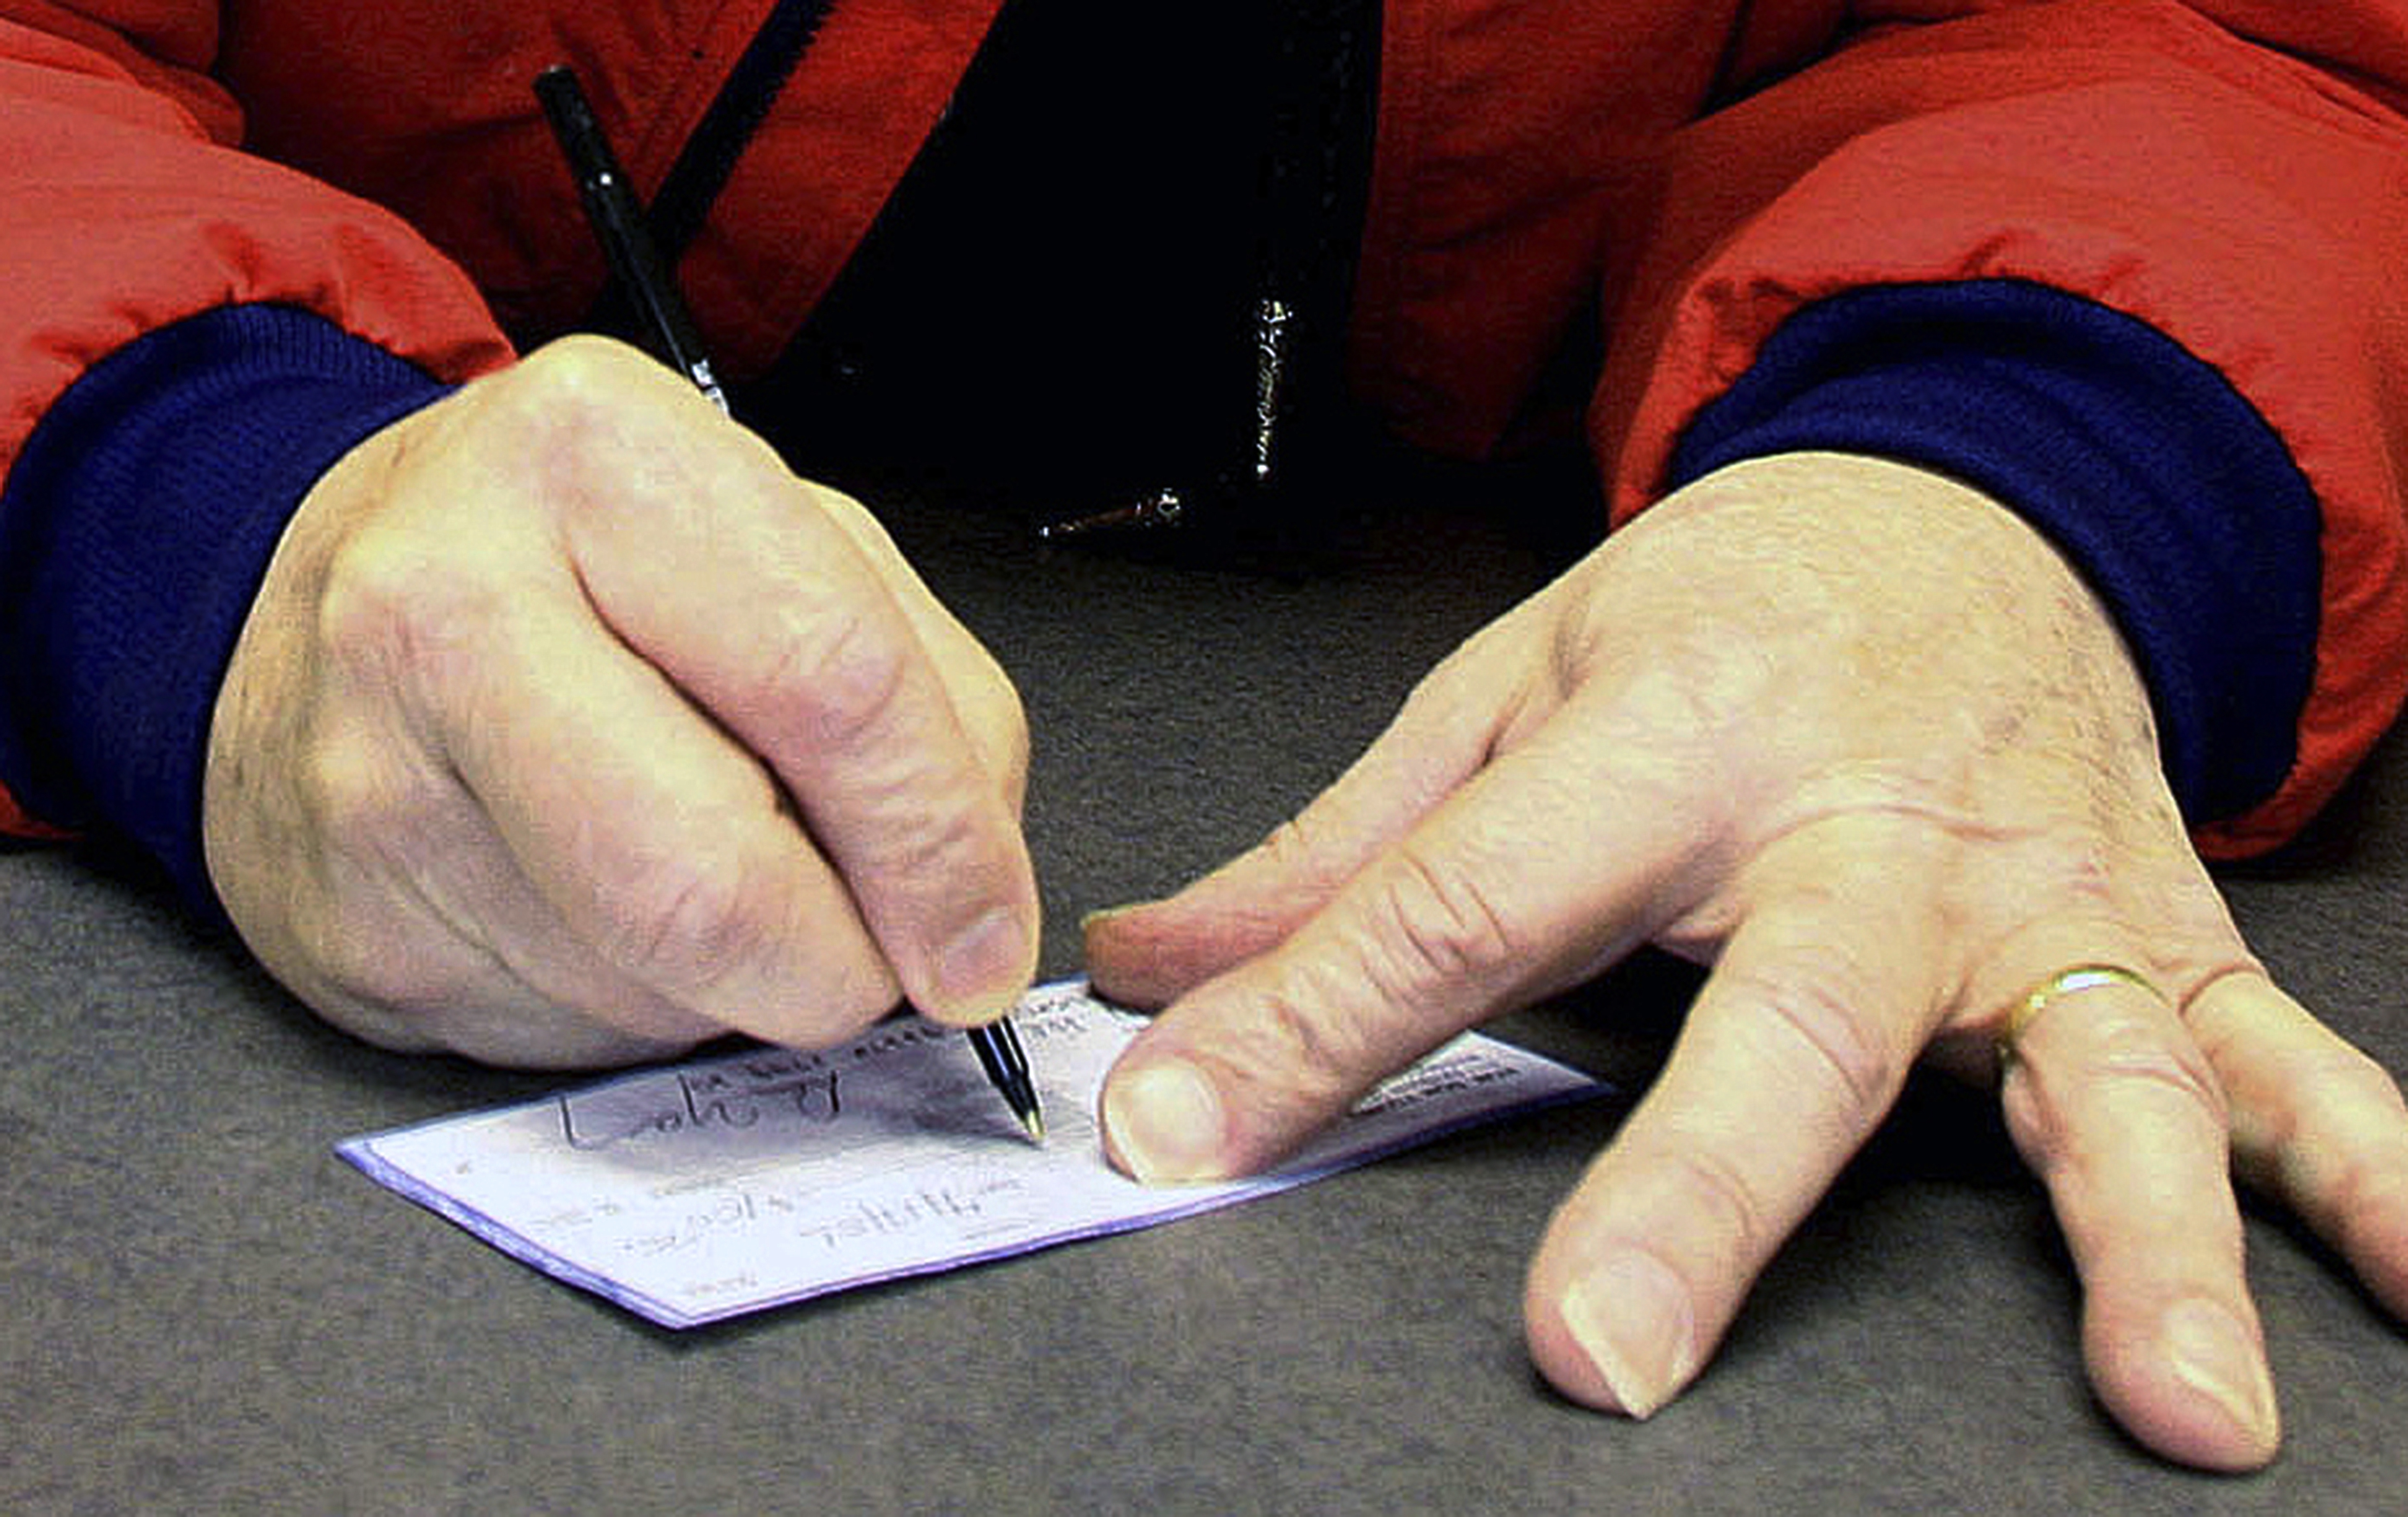 FILE - A man signs a check in Anchorage, Alaska, April 17, 2006,. Check fraud tied to mail theft is up nationwide, according to a recent alert. The U.S. Postal Service is vulnerable, and thieves who can access your checks can change the amount and ferret those funds right out of your bank account. (AP Photo/Al Grillo, File)